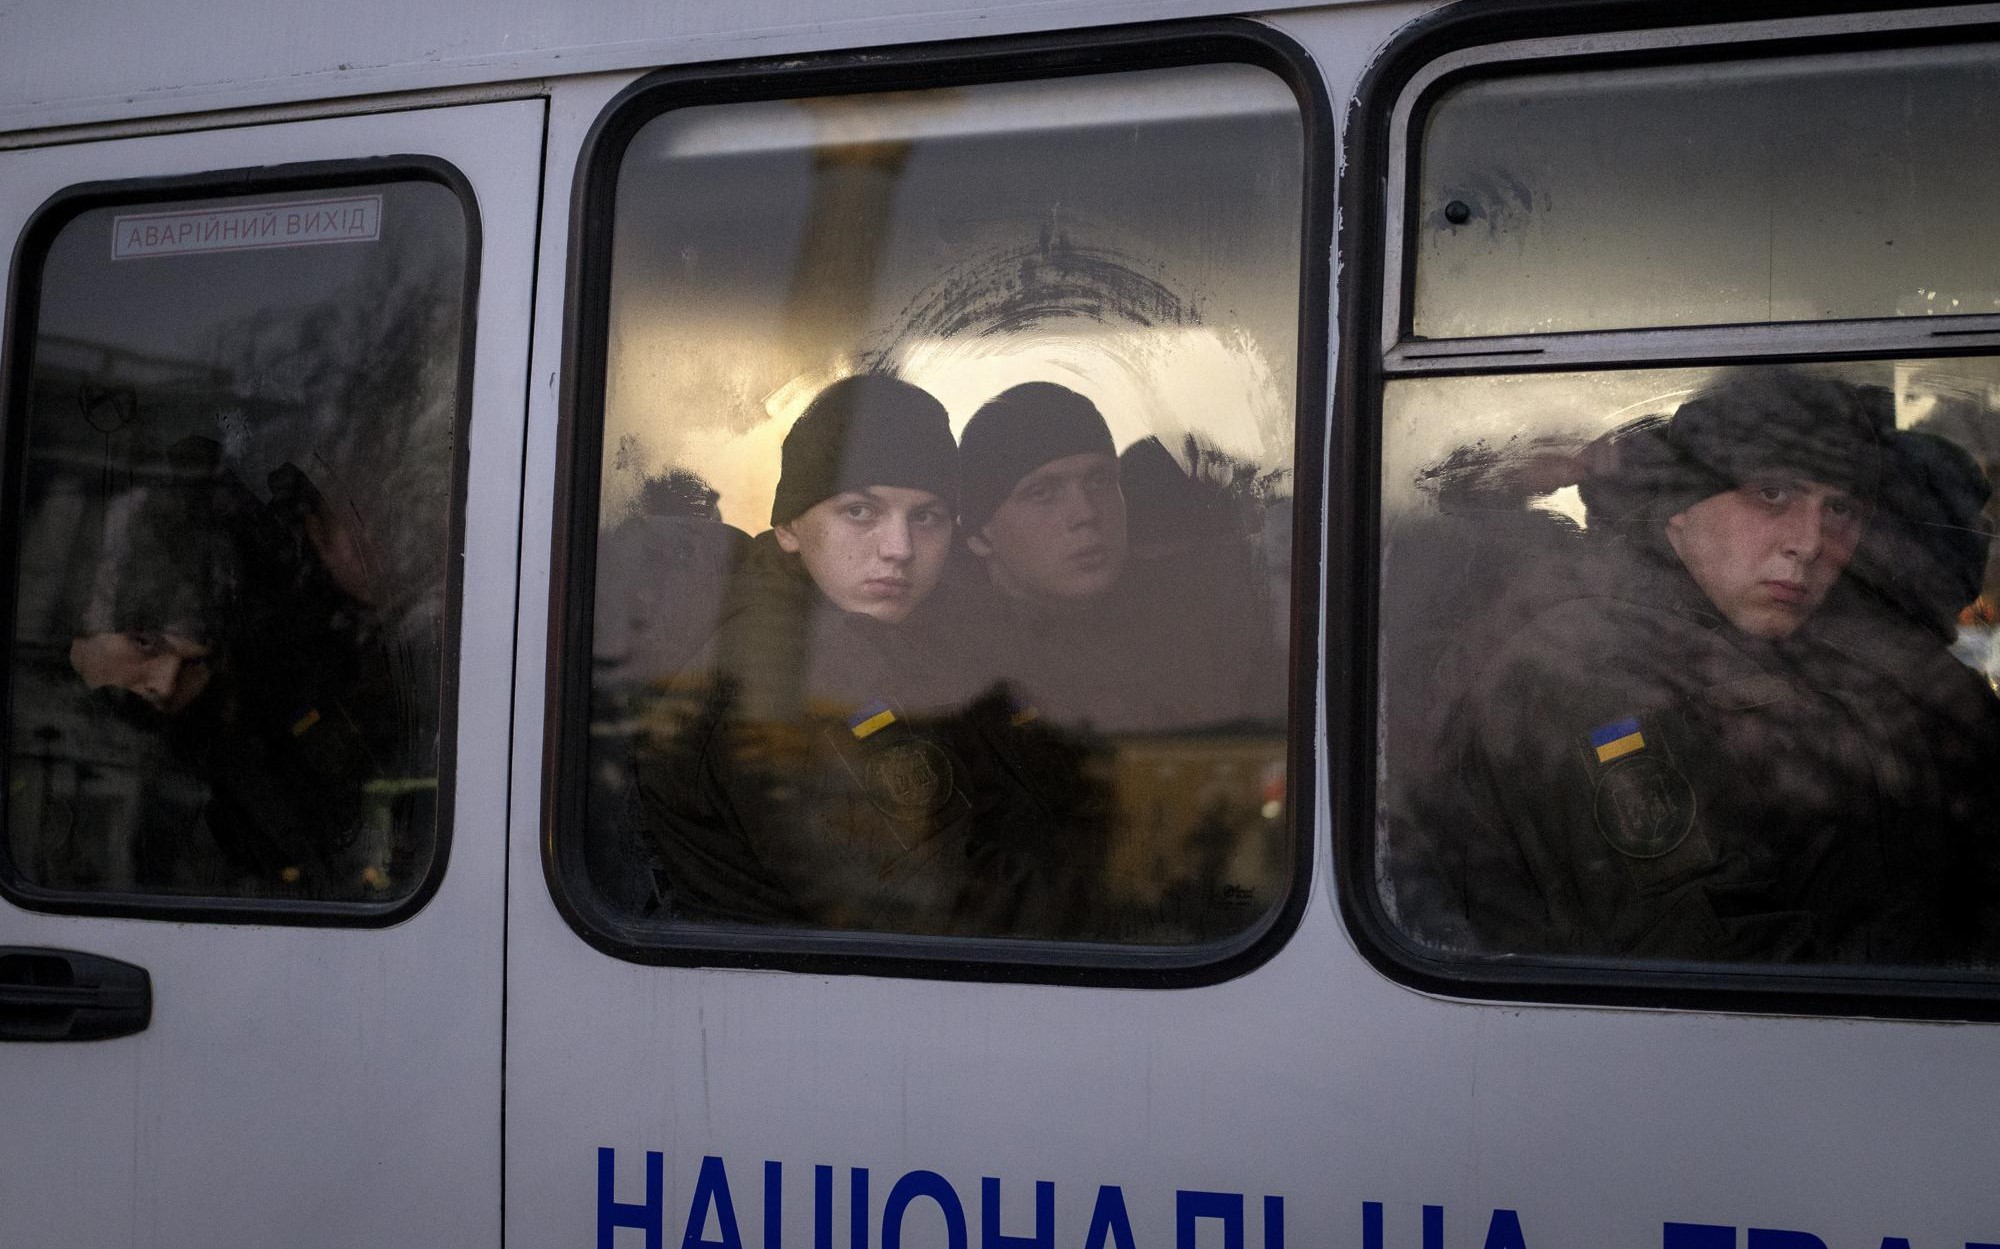 life-in-ukraine-on-the-edge-amid-war-fears-photo-feature